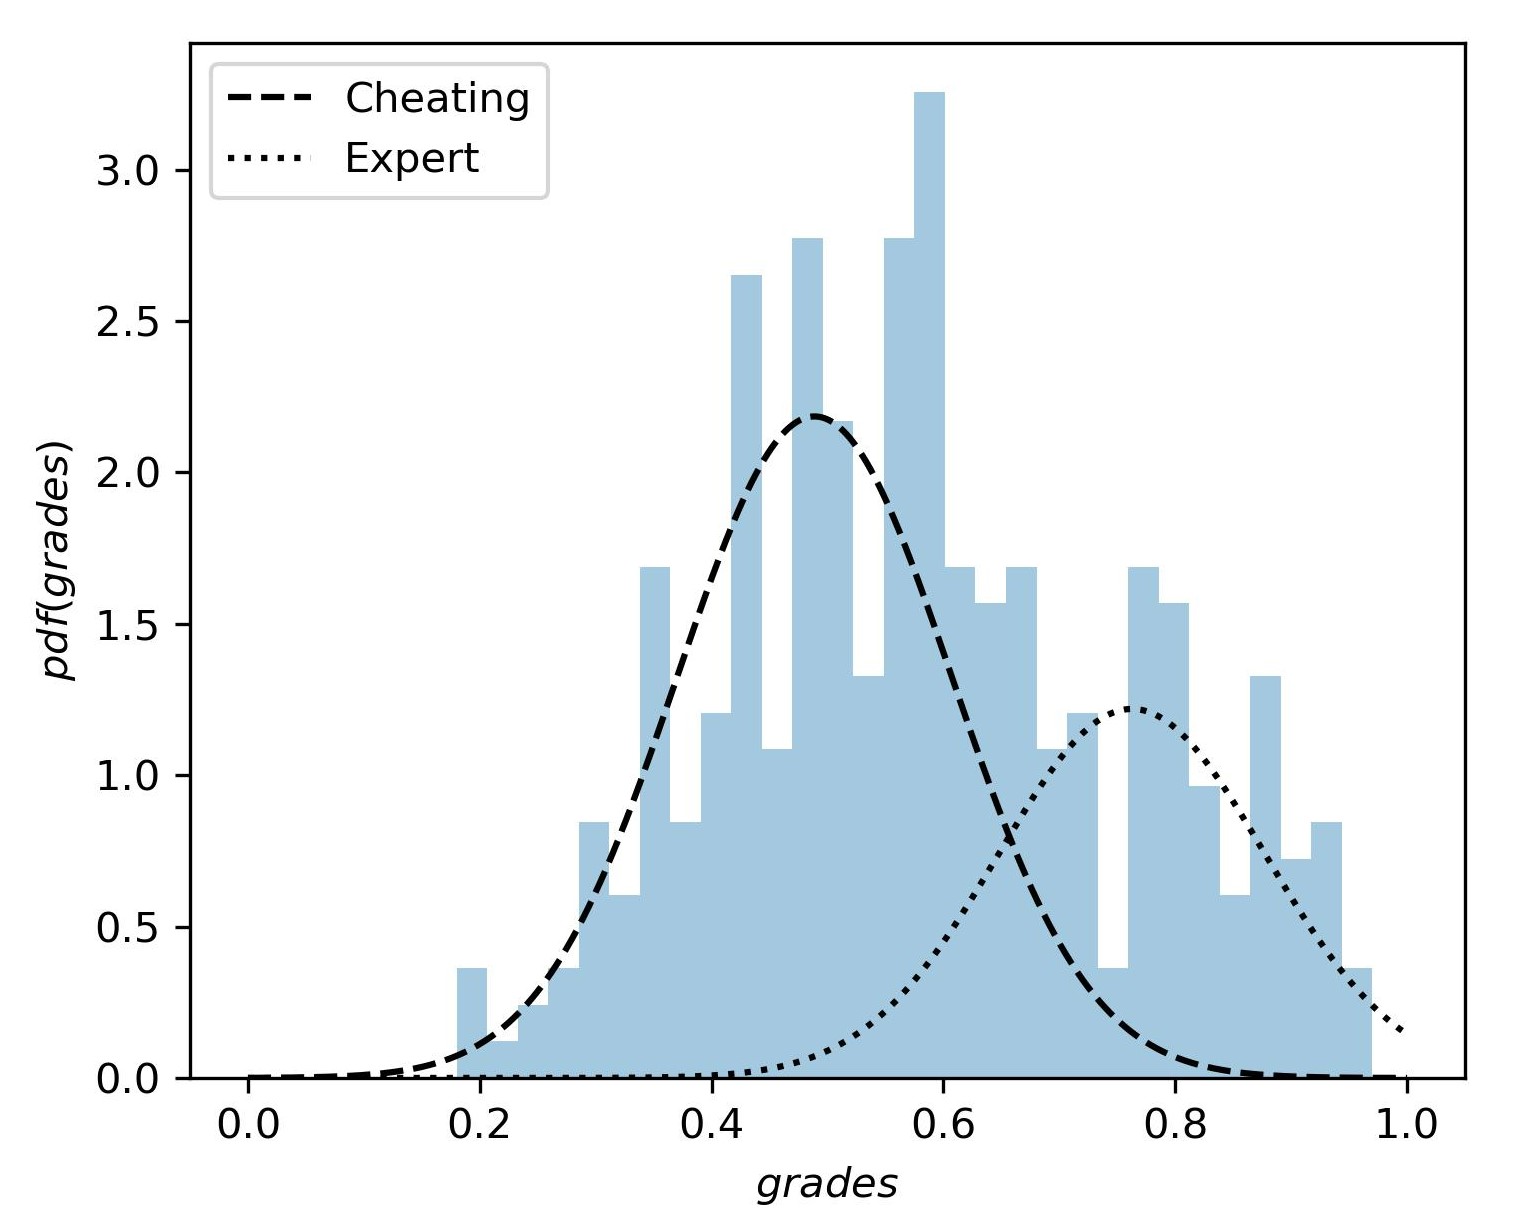 The division of the final exam grade distribution into two components or distribution using Gaussian Mixture Modeling.